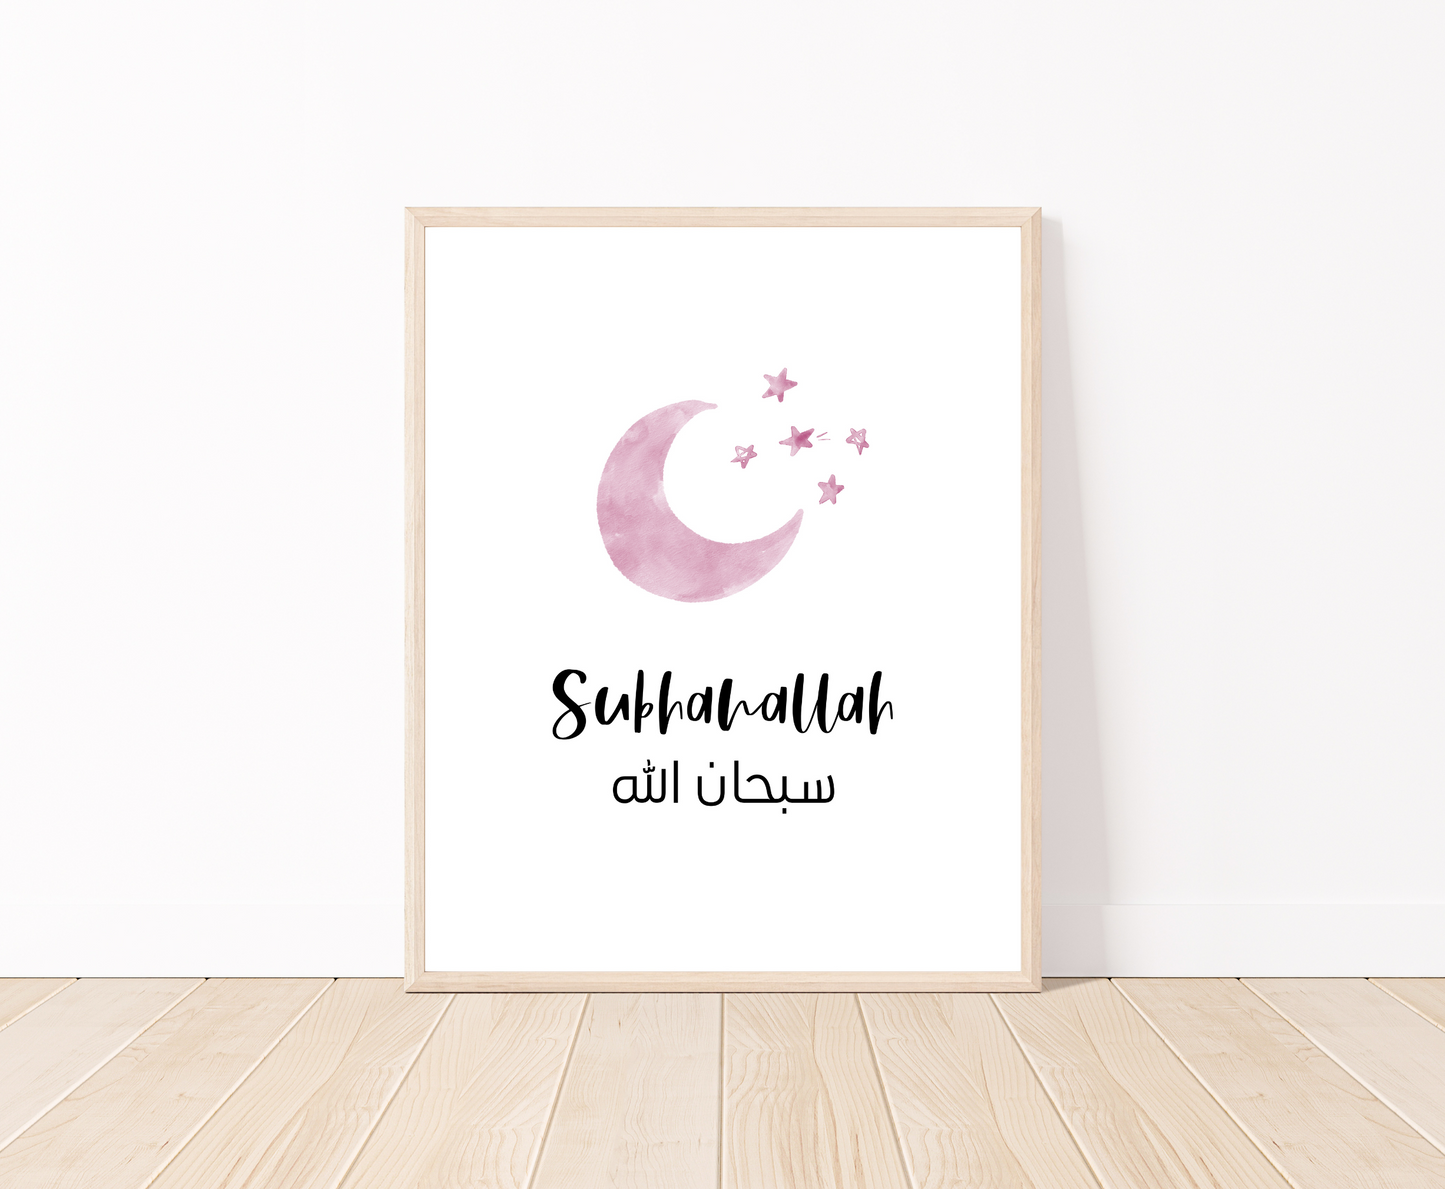 A digital print placed on a white wall and parquet flooring showing a small pink moon and three small stars with a piece of writing below that says: “Subhanallah”.